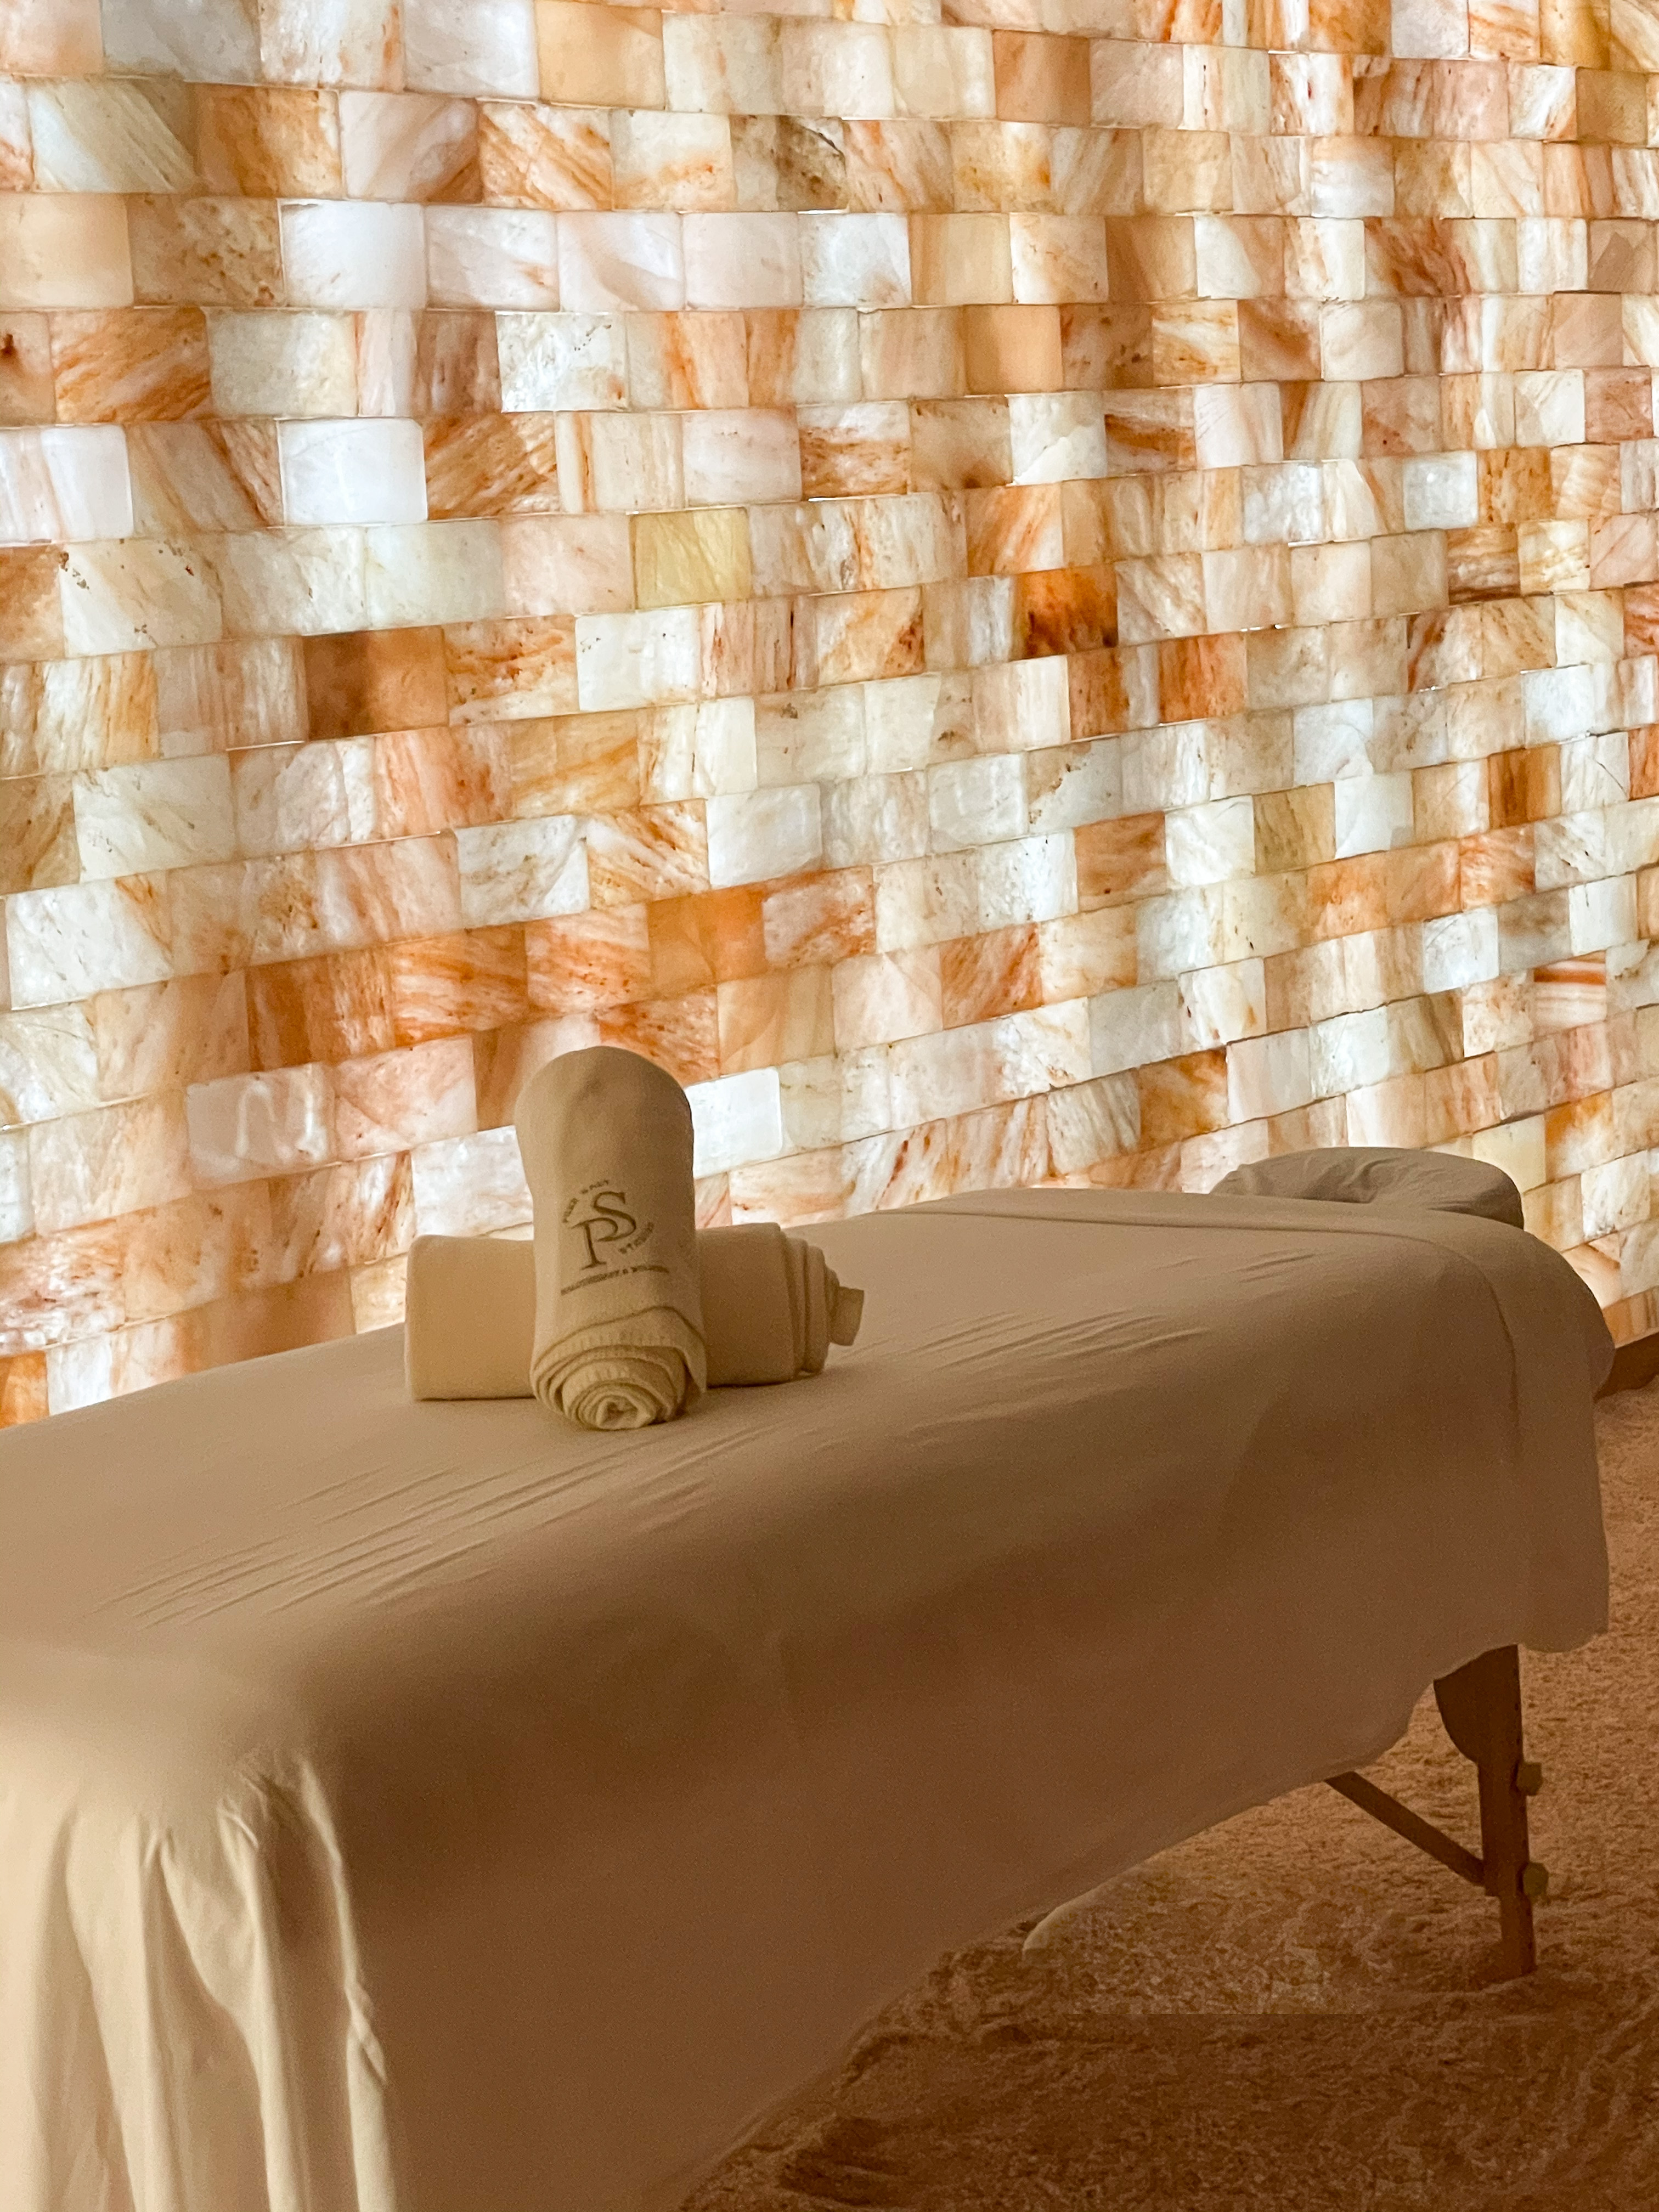 Slow down, experience an escape, let your mind quiet and your body release tension and stress. It's time to schedule your massage at the studio - incorporating the healing benefits of halotherapy and infrared sauna.